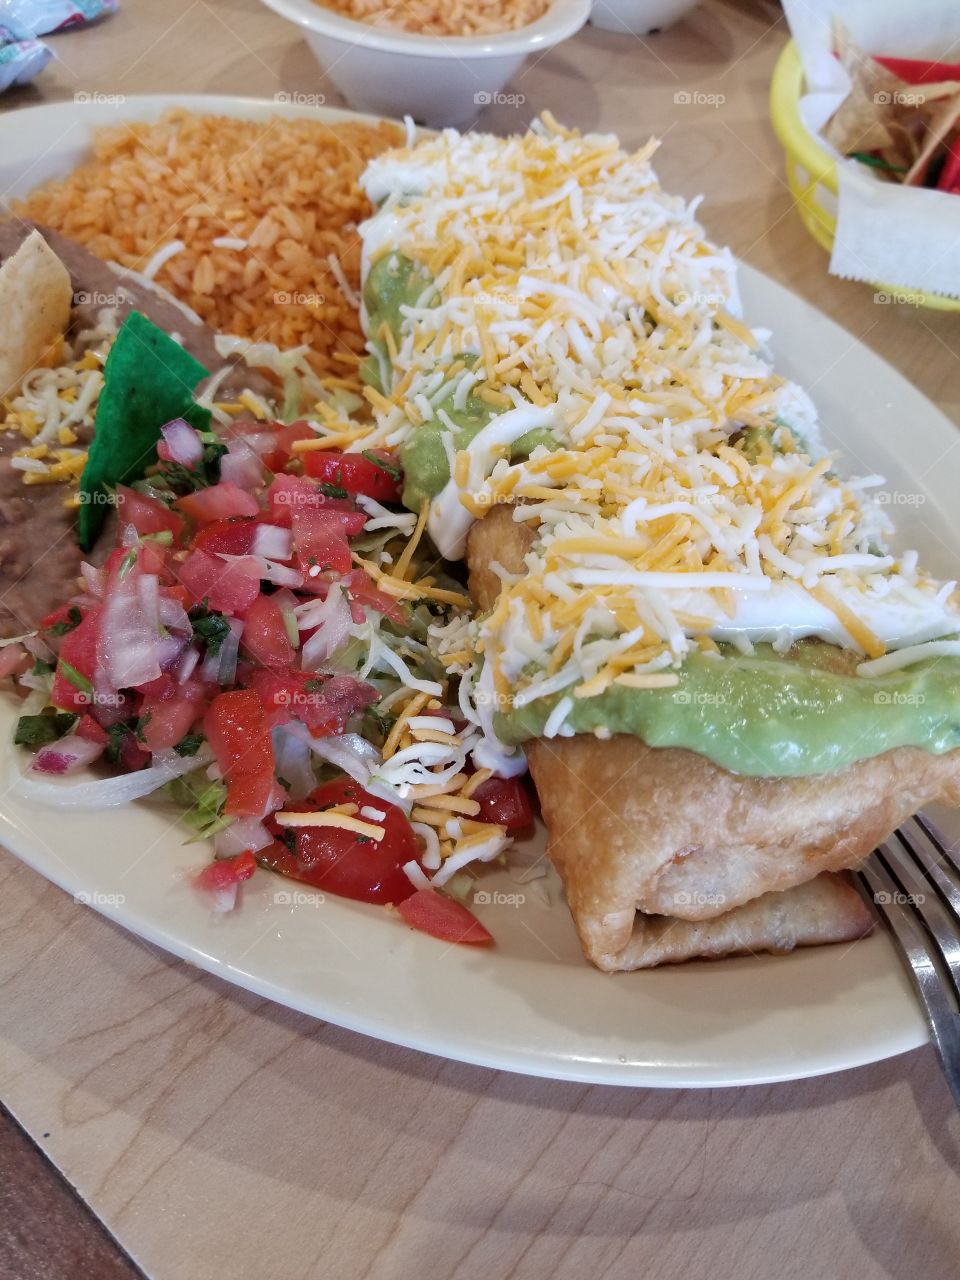 Chicken chimichanga with rice and beans.